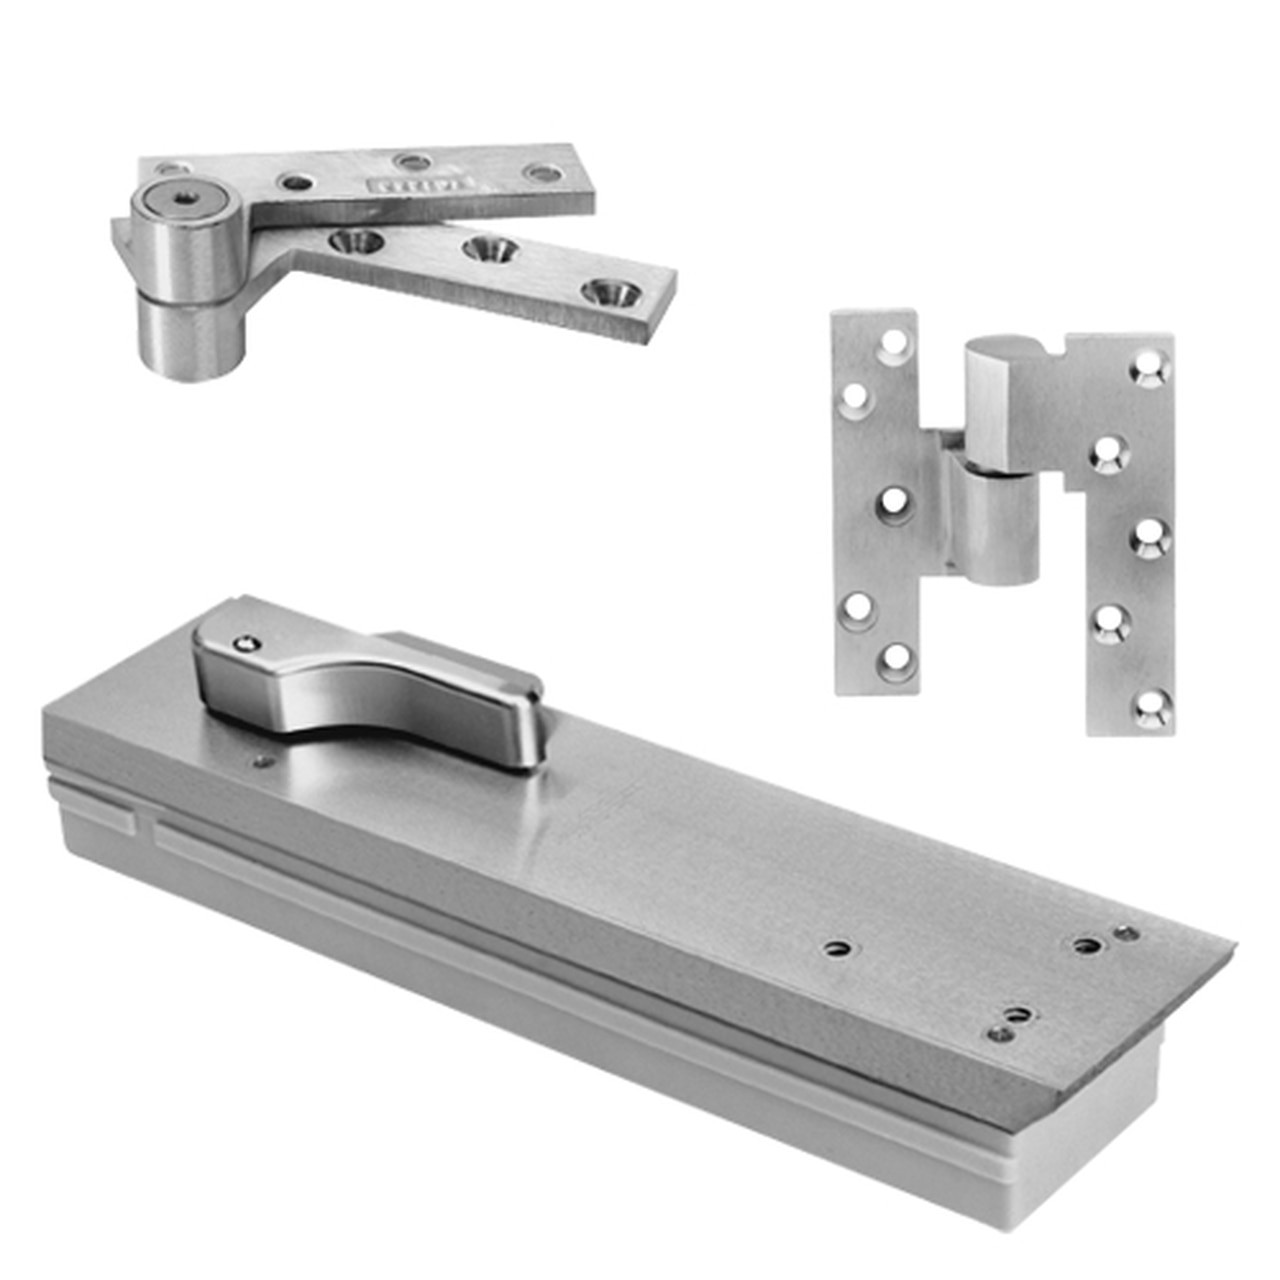 FQ5103NBC-LFP-RH-626 Rixson Q51 Series Fire Rated 3/4" Offset Hung Shallow Depth Floor Closers in Satin Chrome Finish